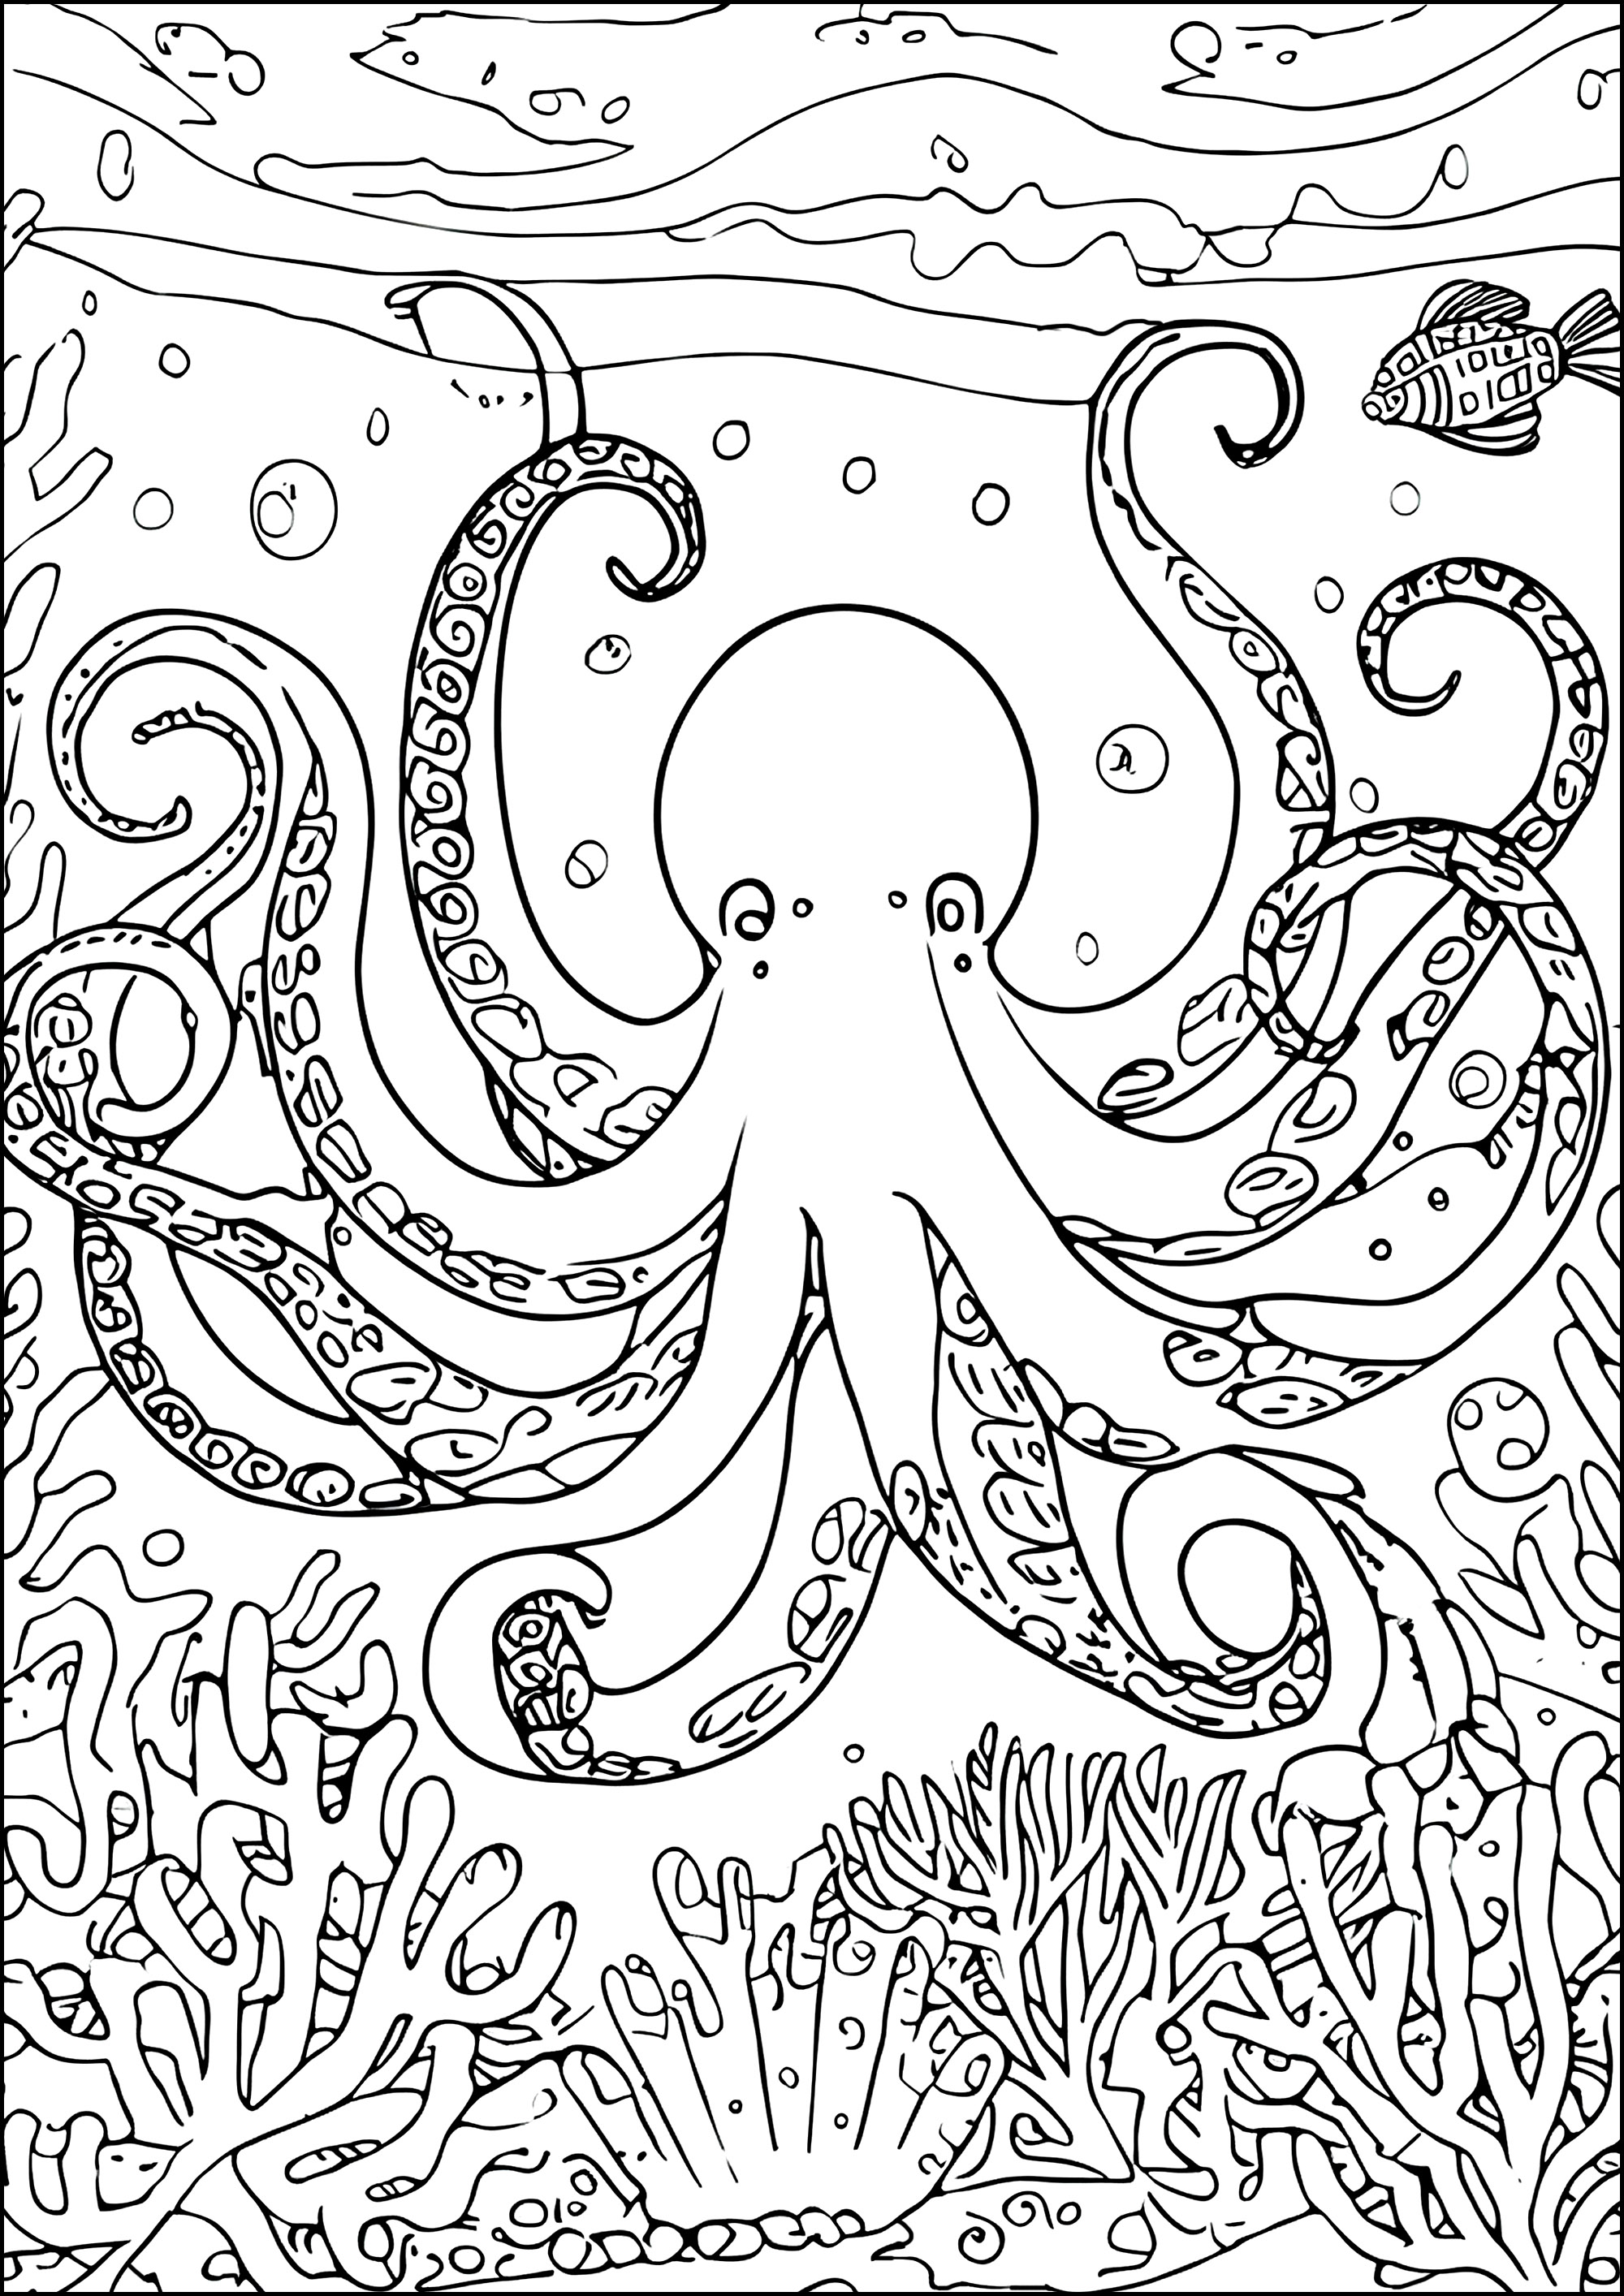 Seabed octopuses. Complex coloring with an octopus in a turbulent seabed